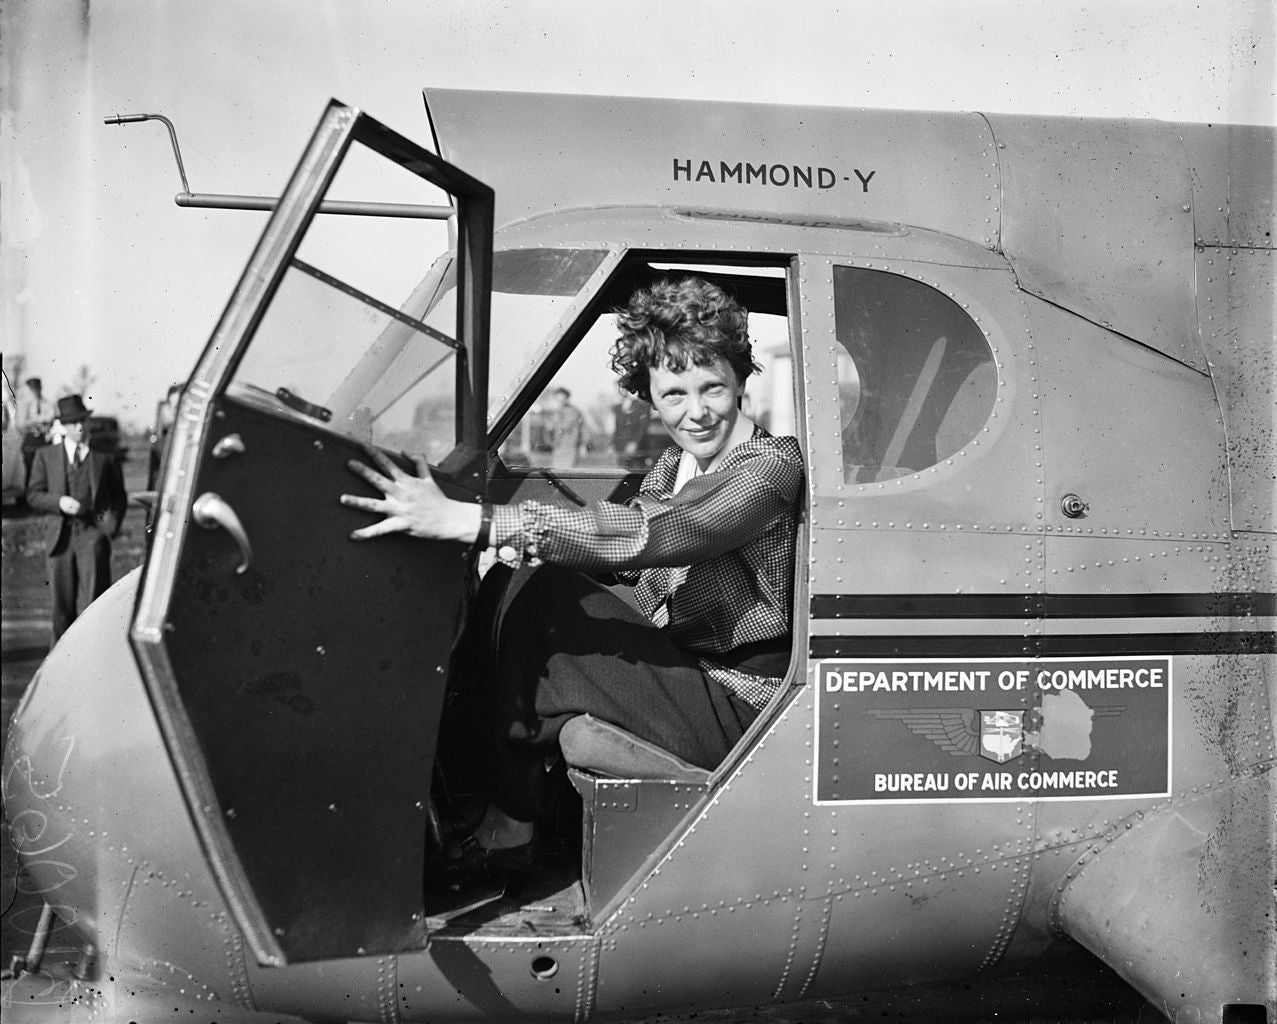 Amelia Earhart: First Aviator to Cross the Pacific Ocean